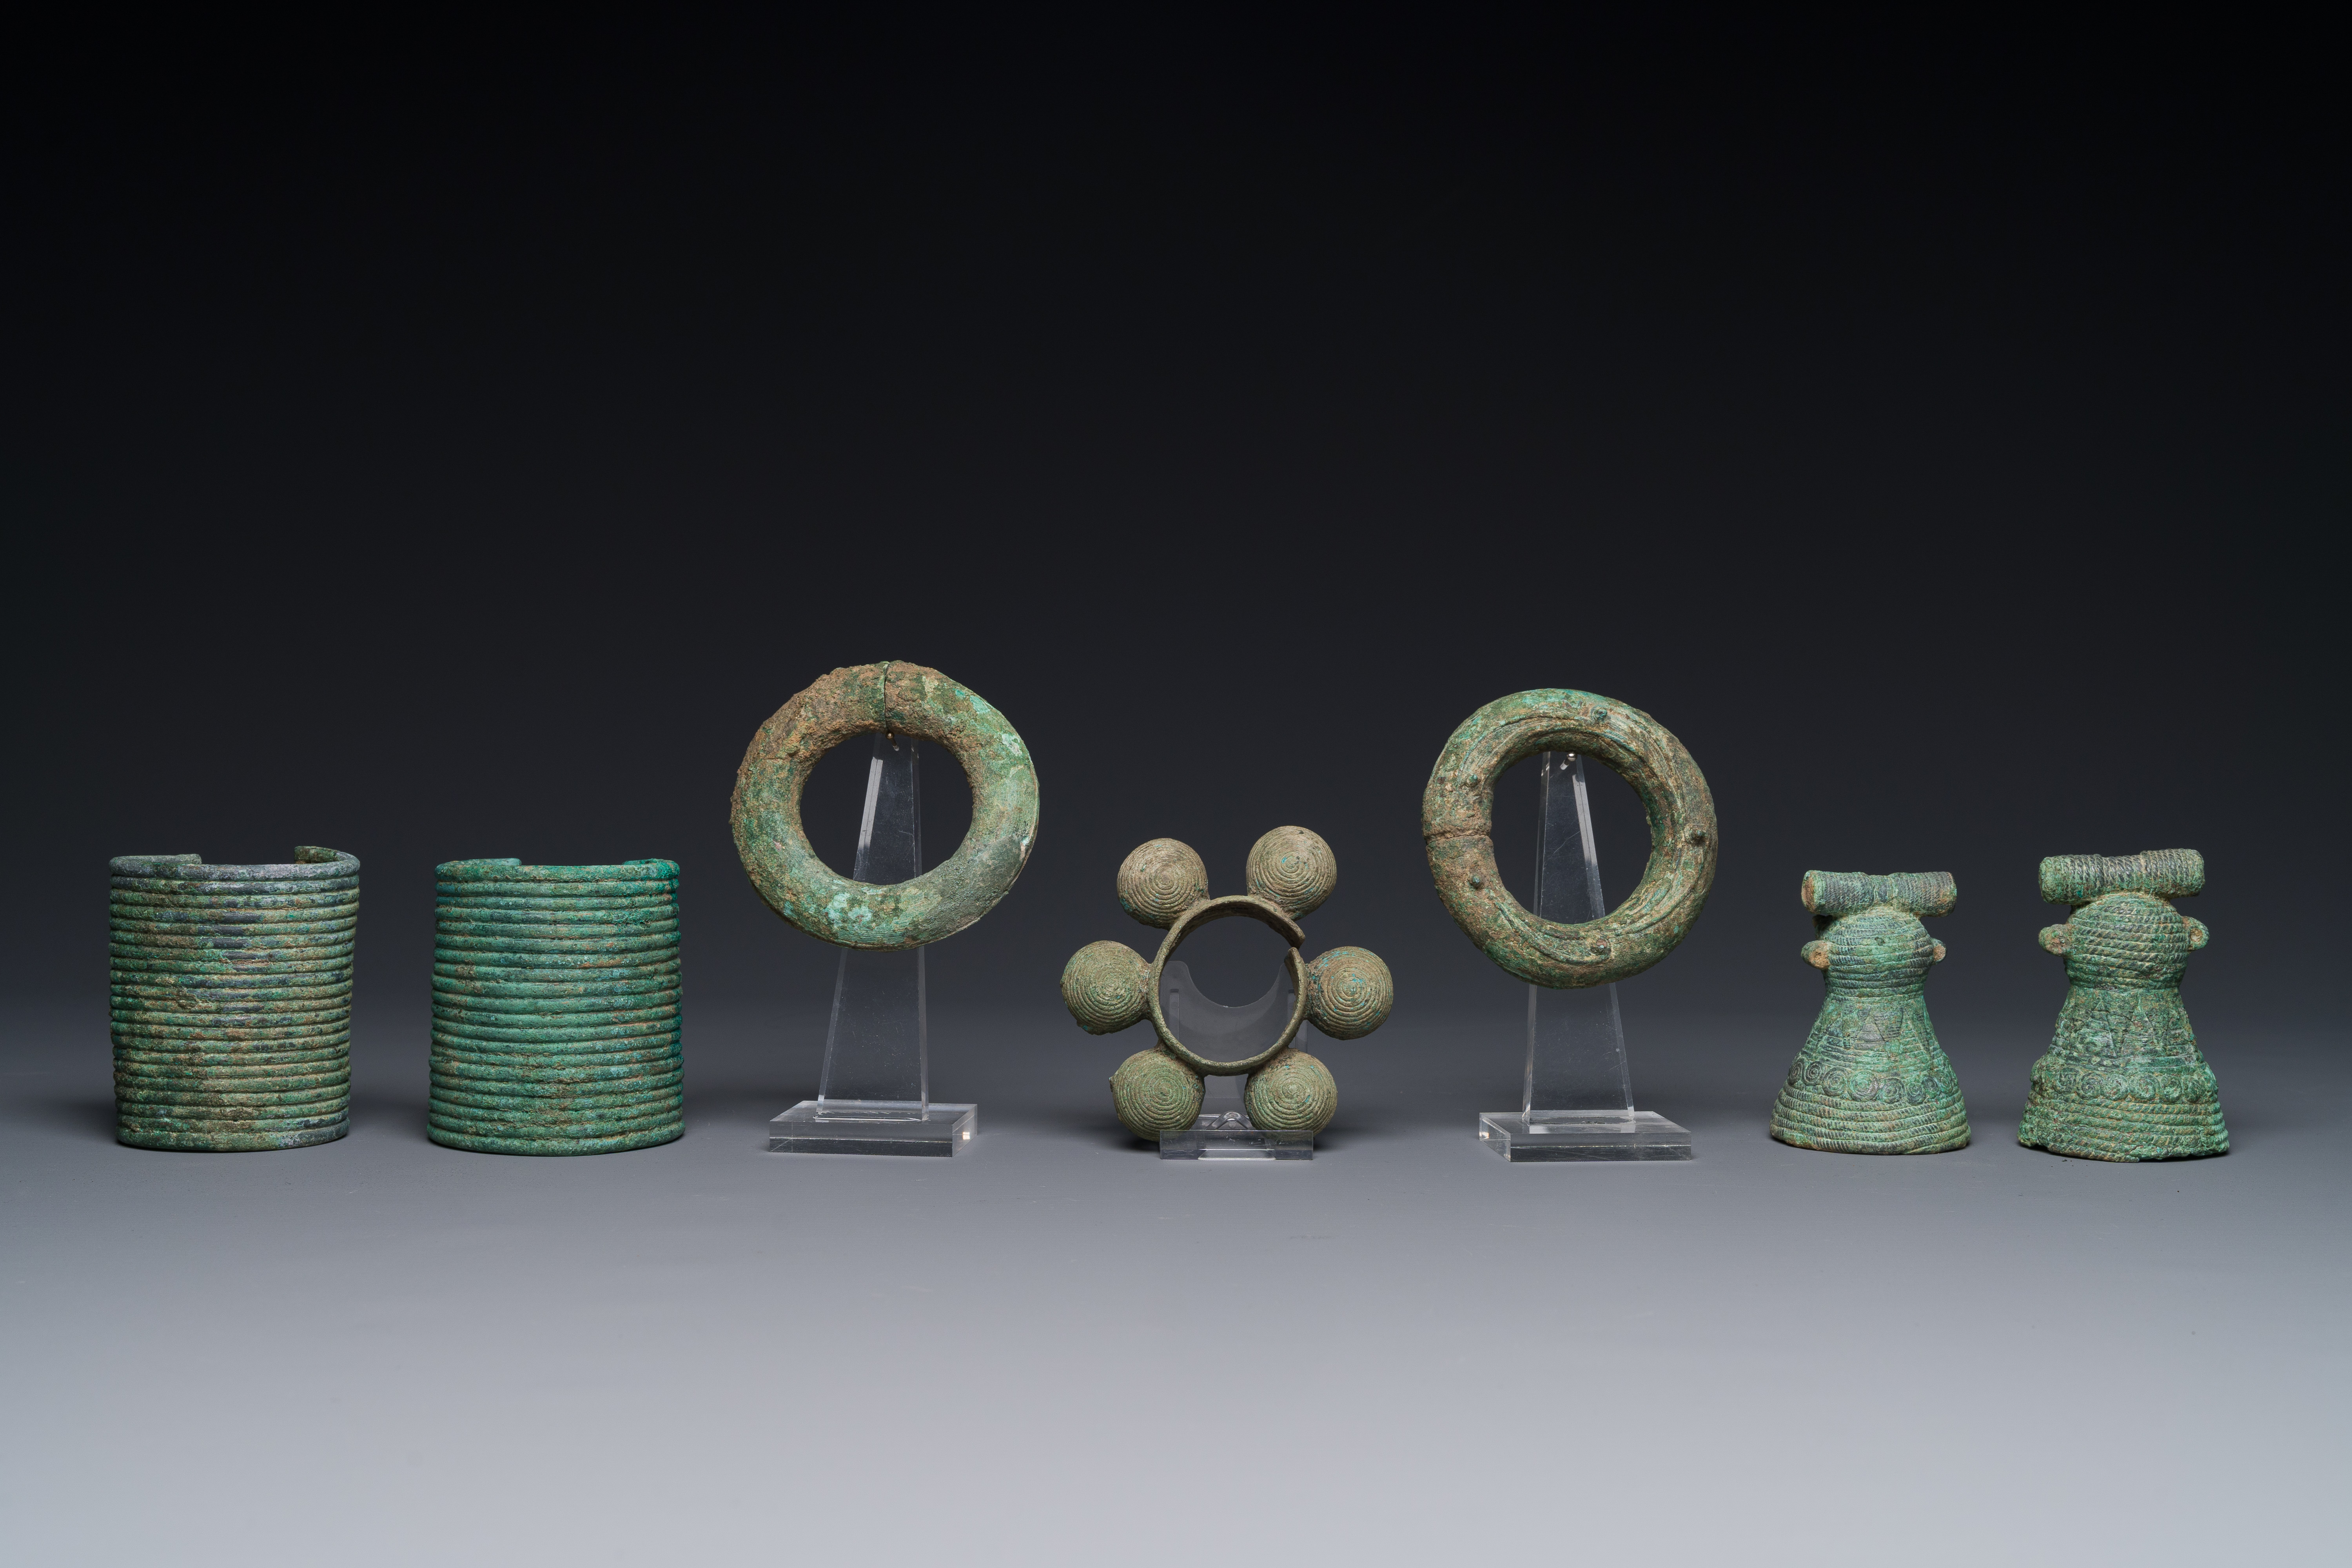 A collection of bronze bracelets and animal bells, Vietnam and Cambodia, 4th/1st C. B.C - Image 2 of 18